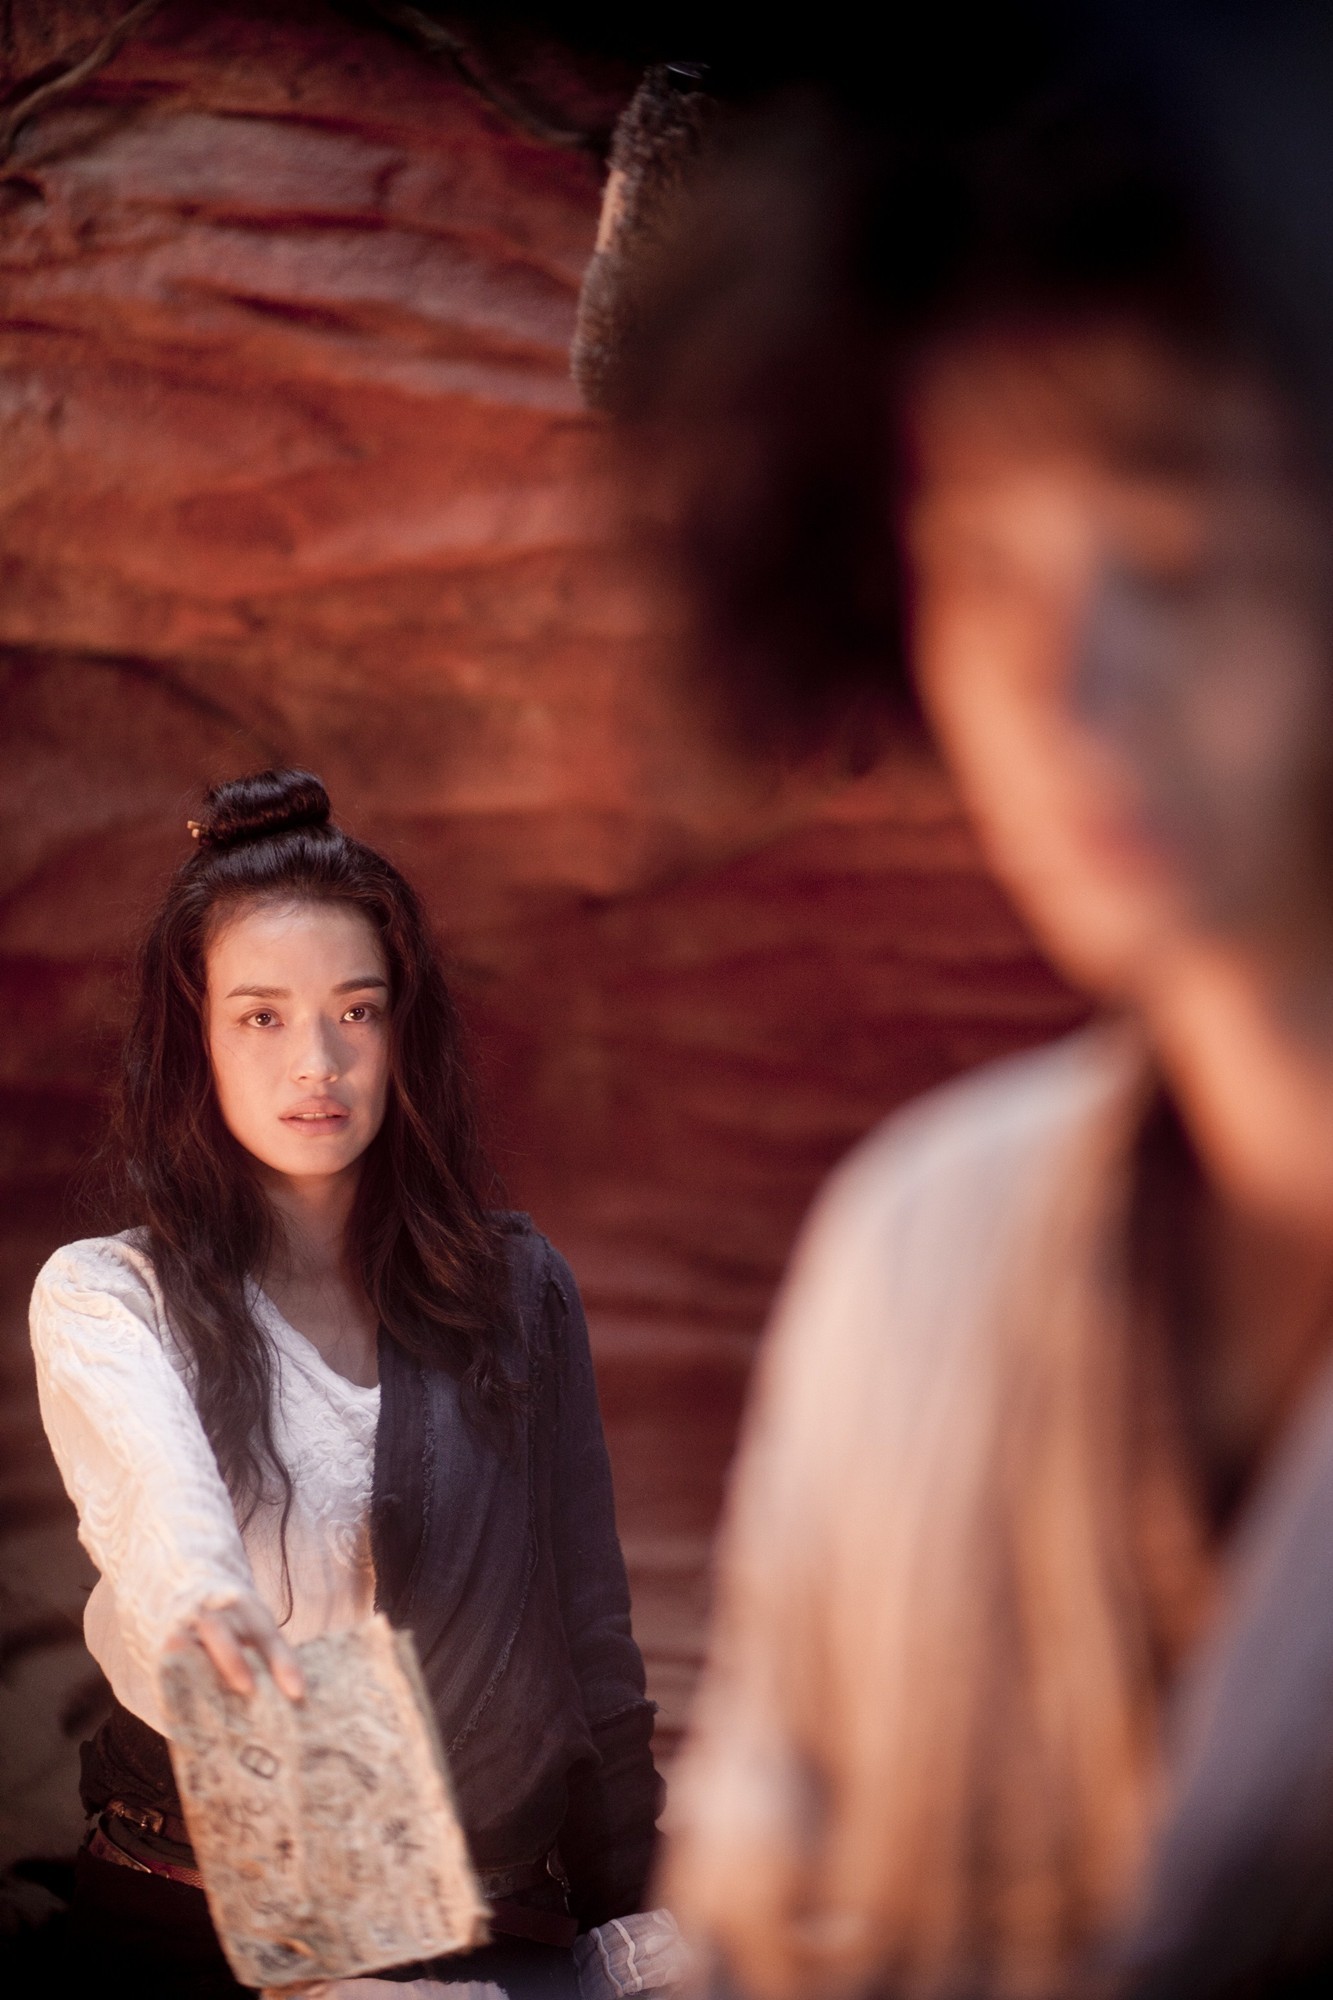 Shu Qi in Magnet Releasing's Journey to the West (2014)